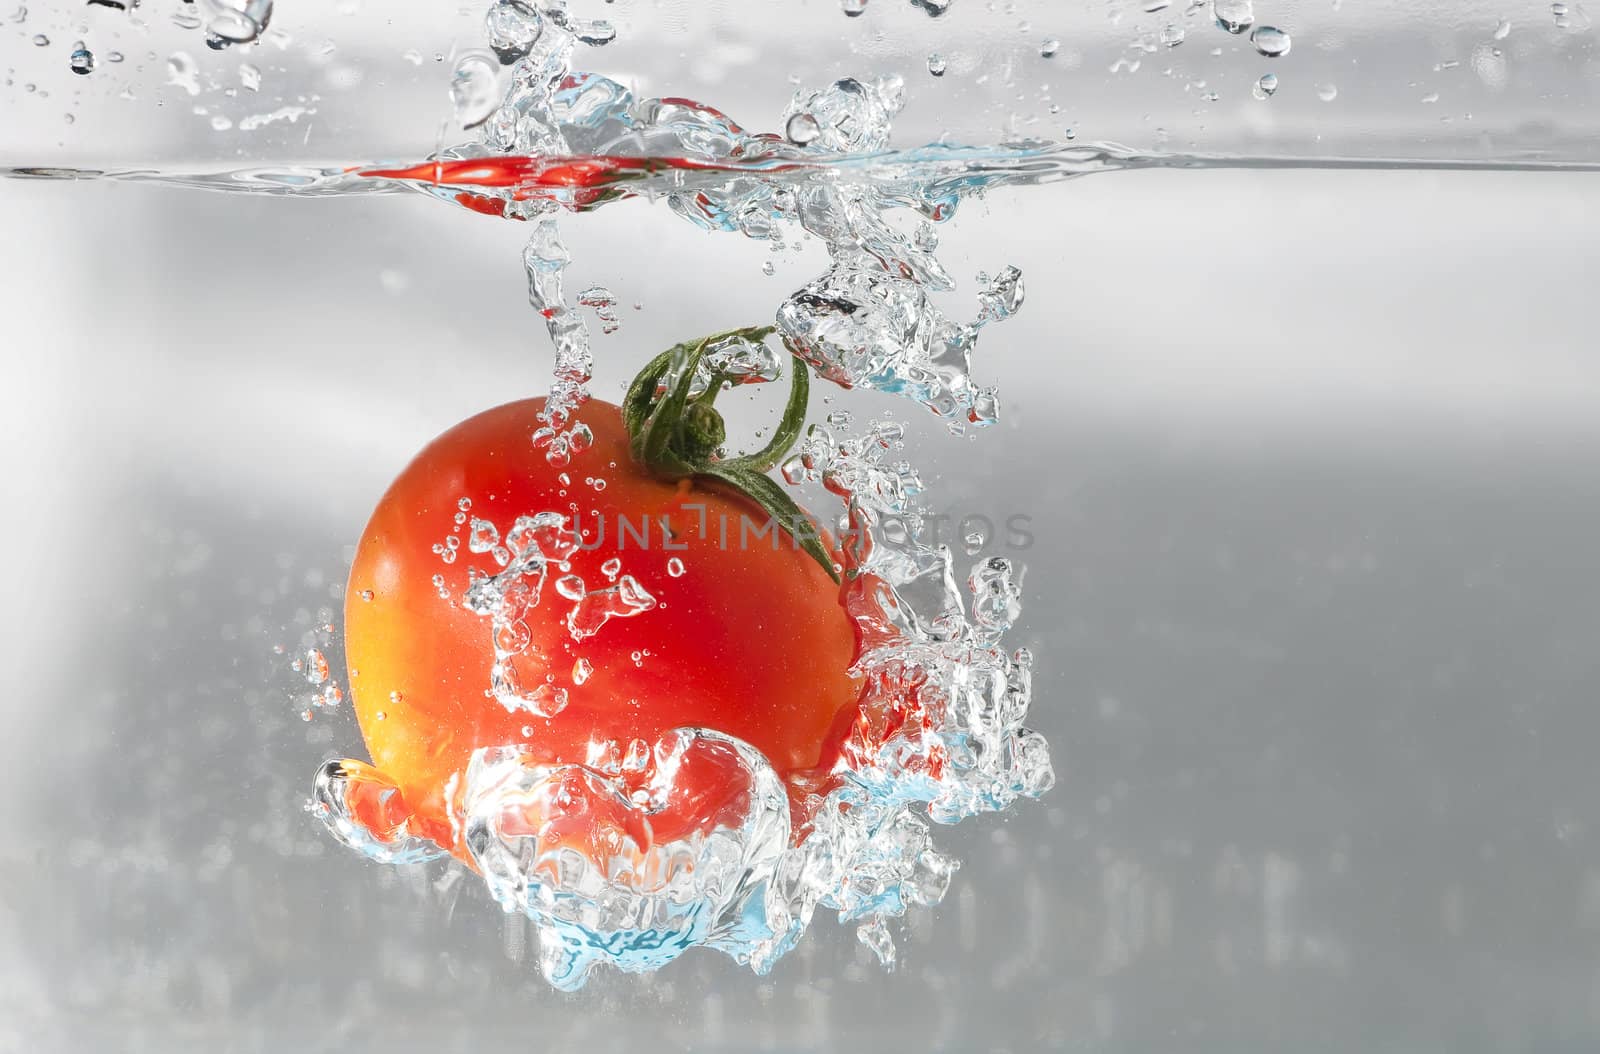 A cherry tomatoe dip into water